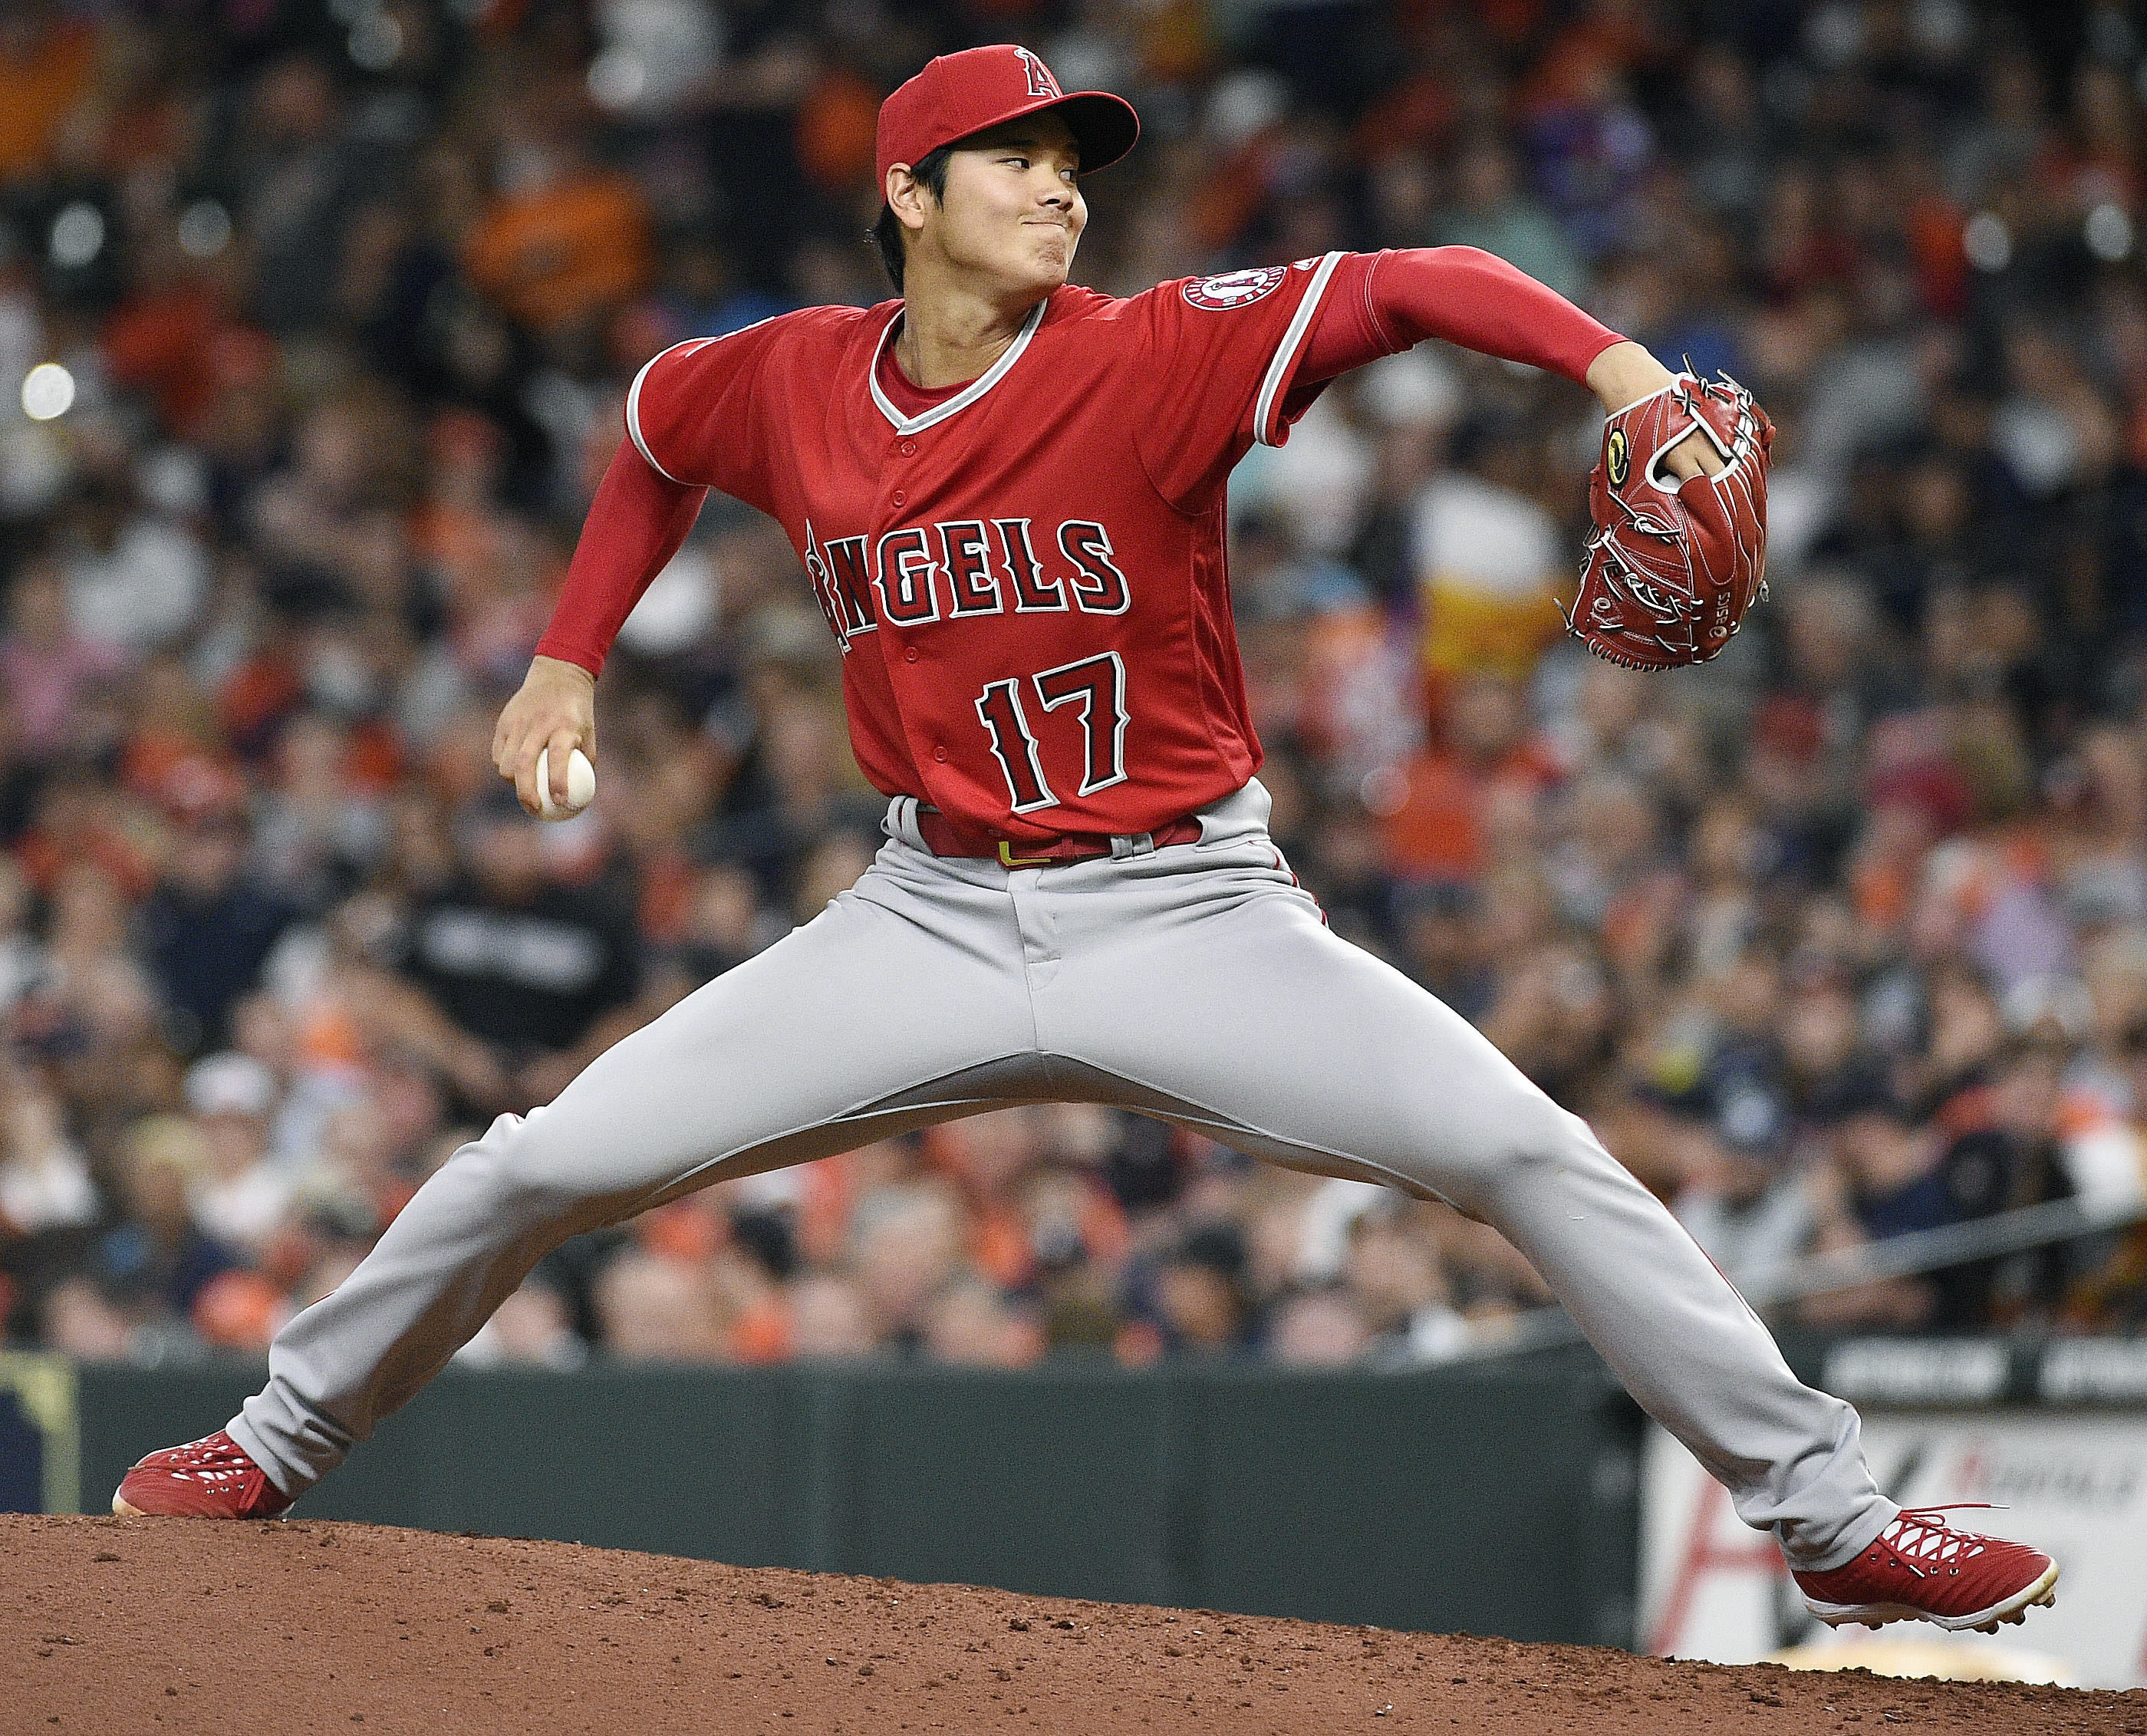 Angels' Shohei Ohtani throws fastest pitch of MLB career